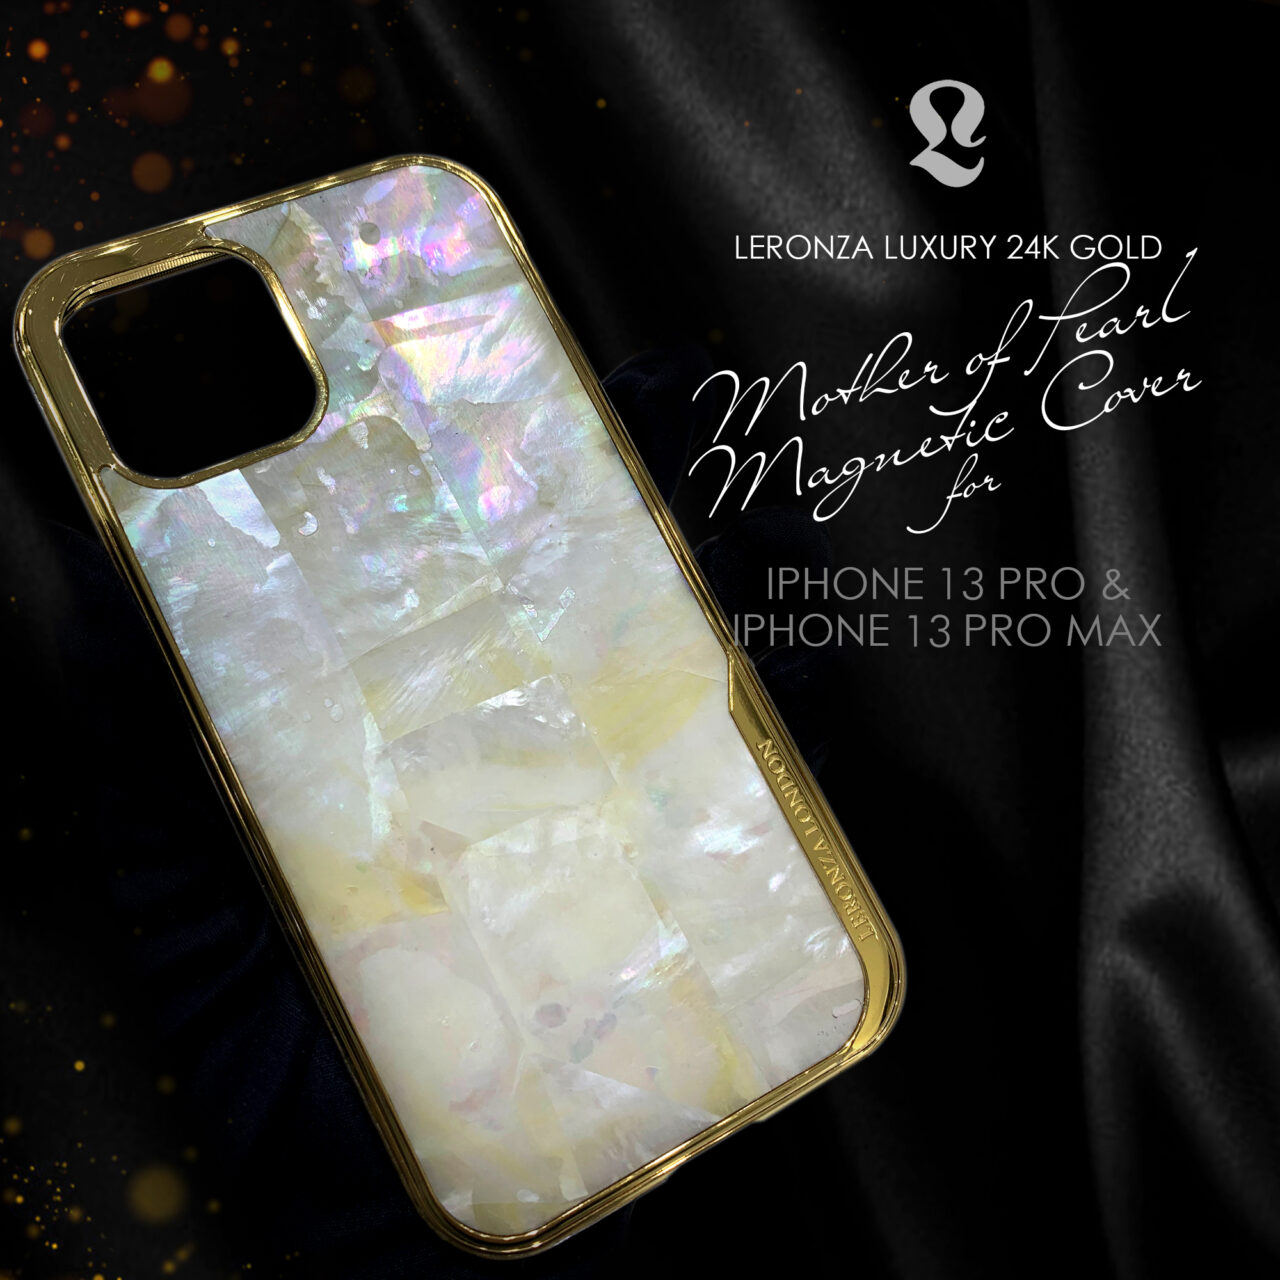 24K GOLD IPHONE 13 PRO MOTHER OF PEARL CASING